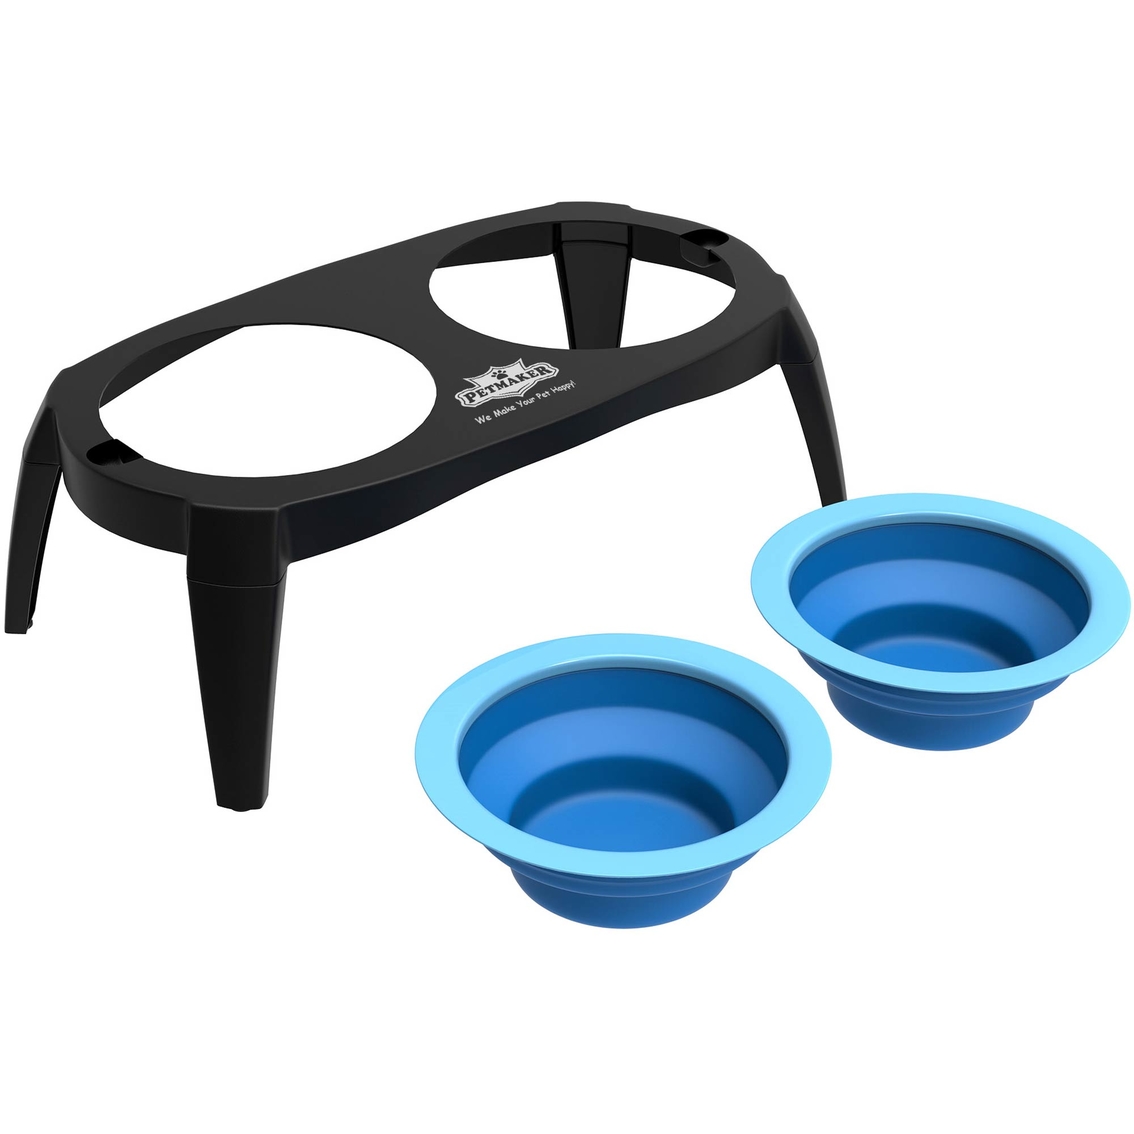 Petmaker Elevated Pet Bowls - Image 8 of 8